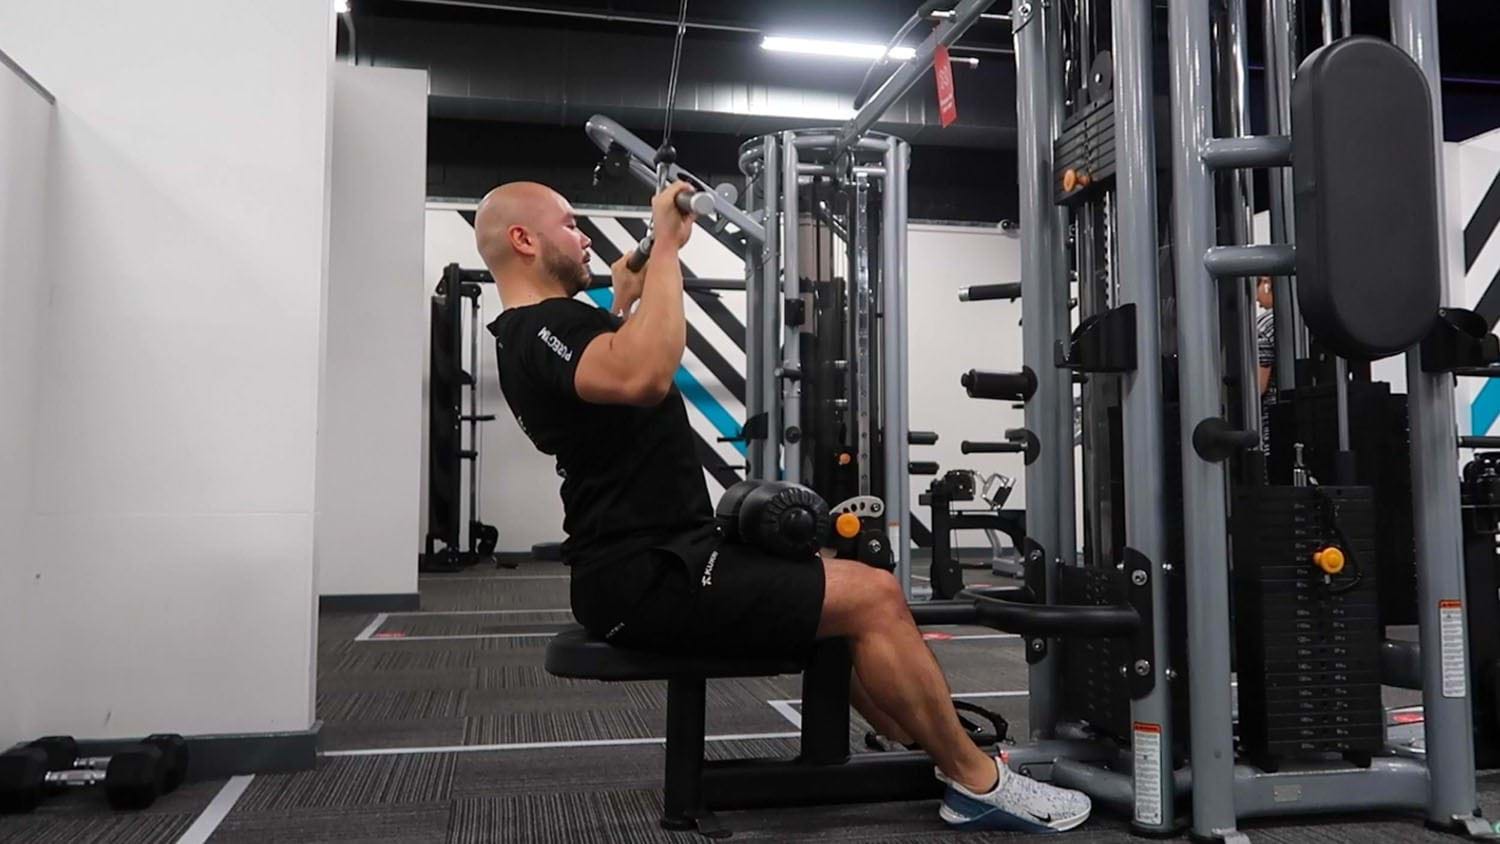 Lat pull down exercise